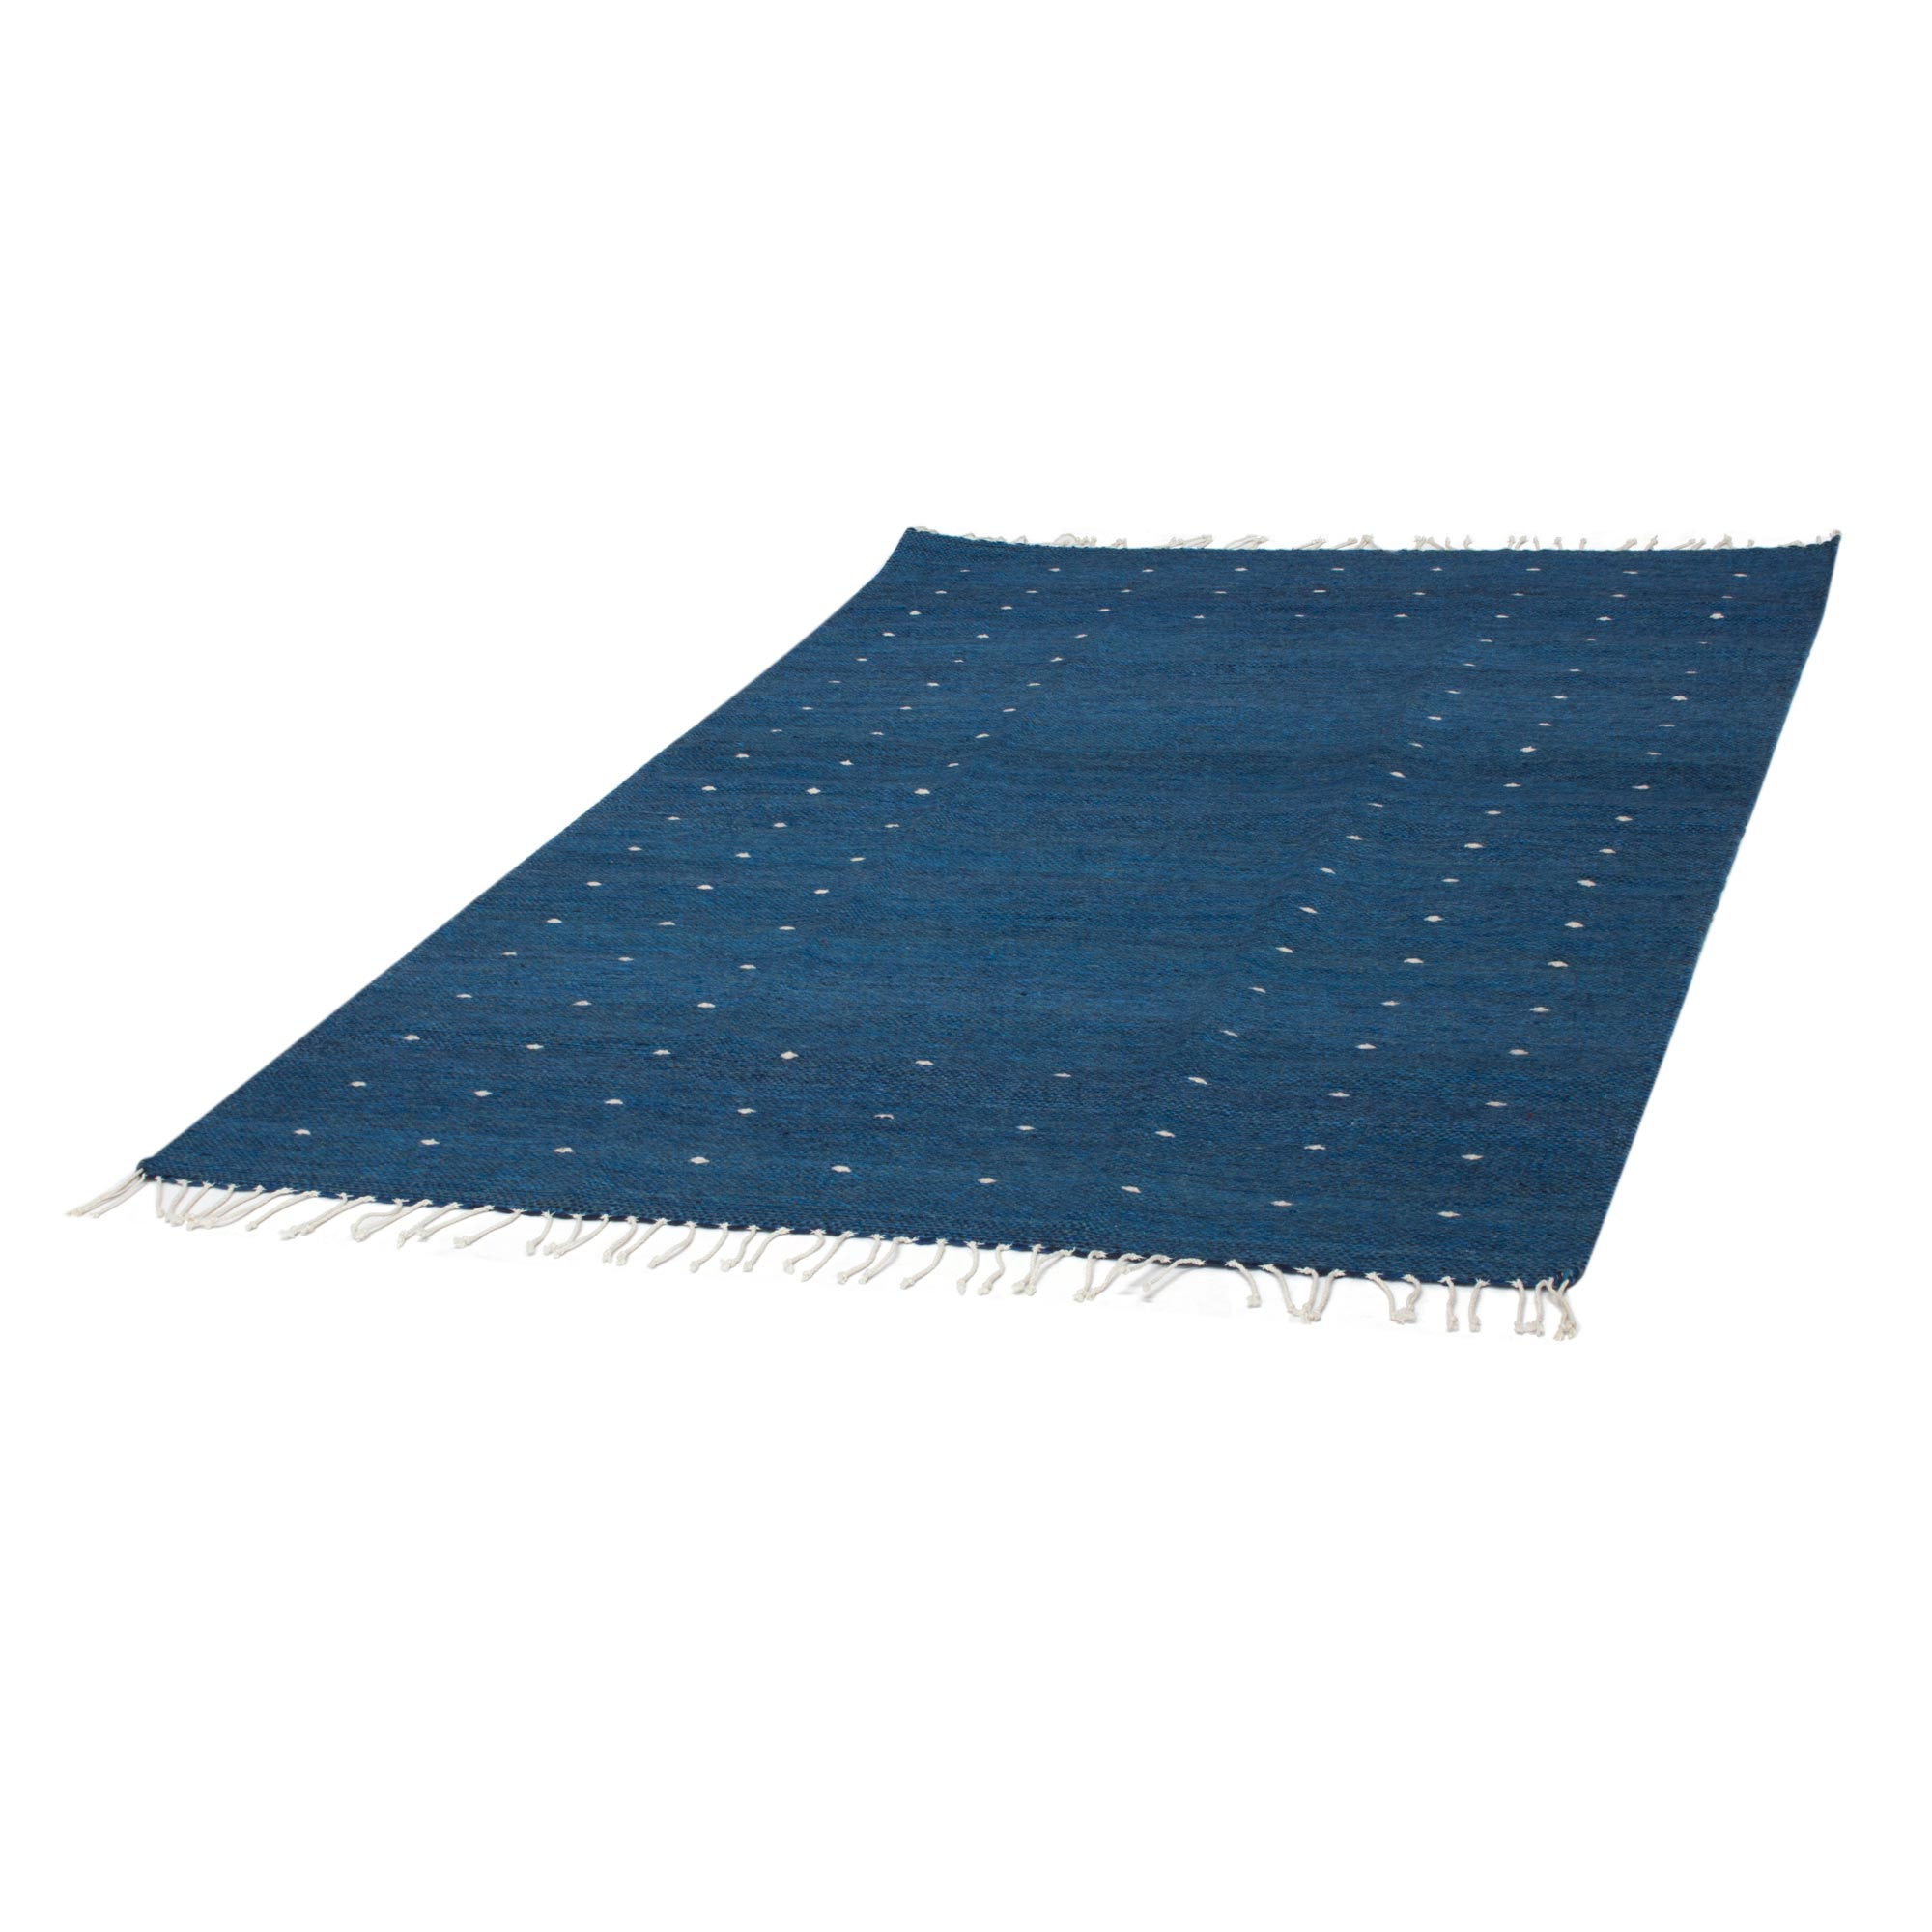 Authentic Artisan Handwoven Zapotec Blue Wool Rug 4 x 6.5 - Stars in ...